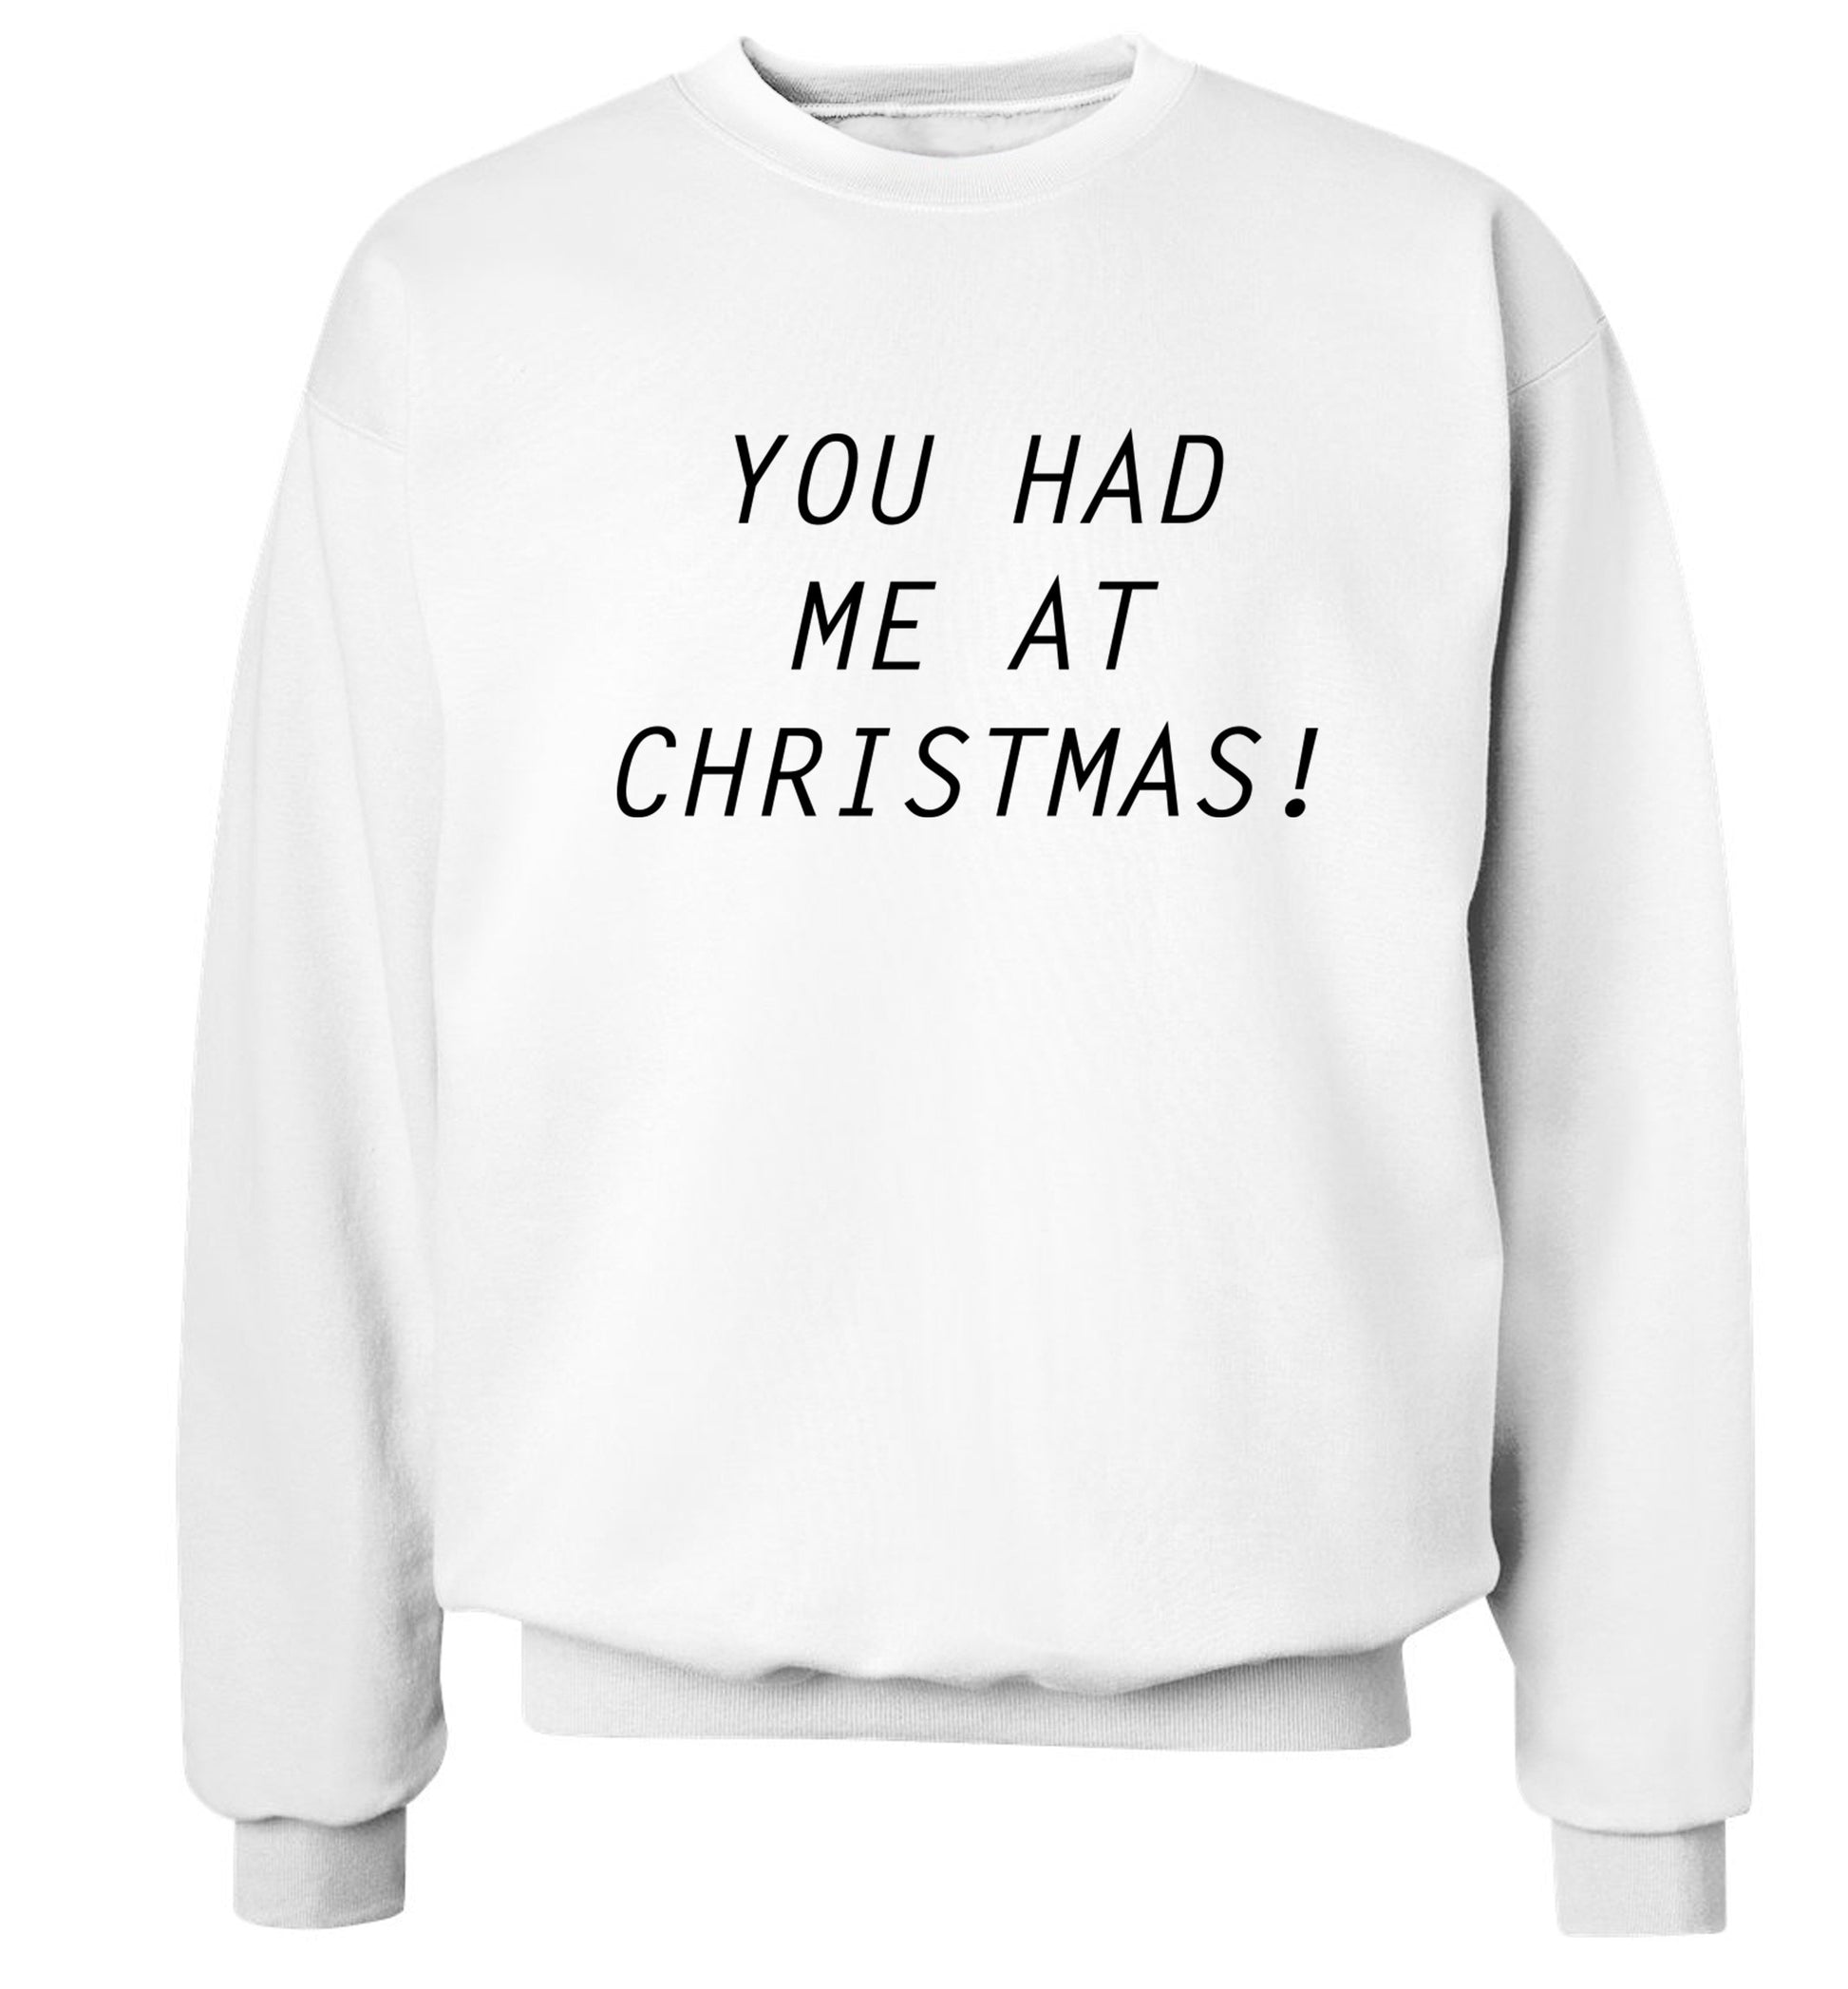 You had me at Christmas Adult's unisex white Sweater 2XL